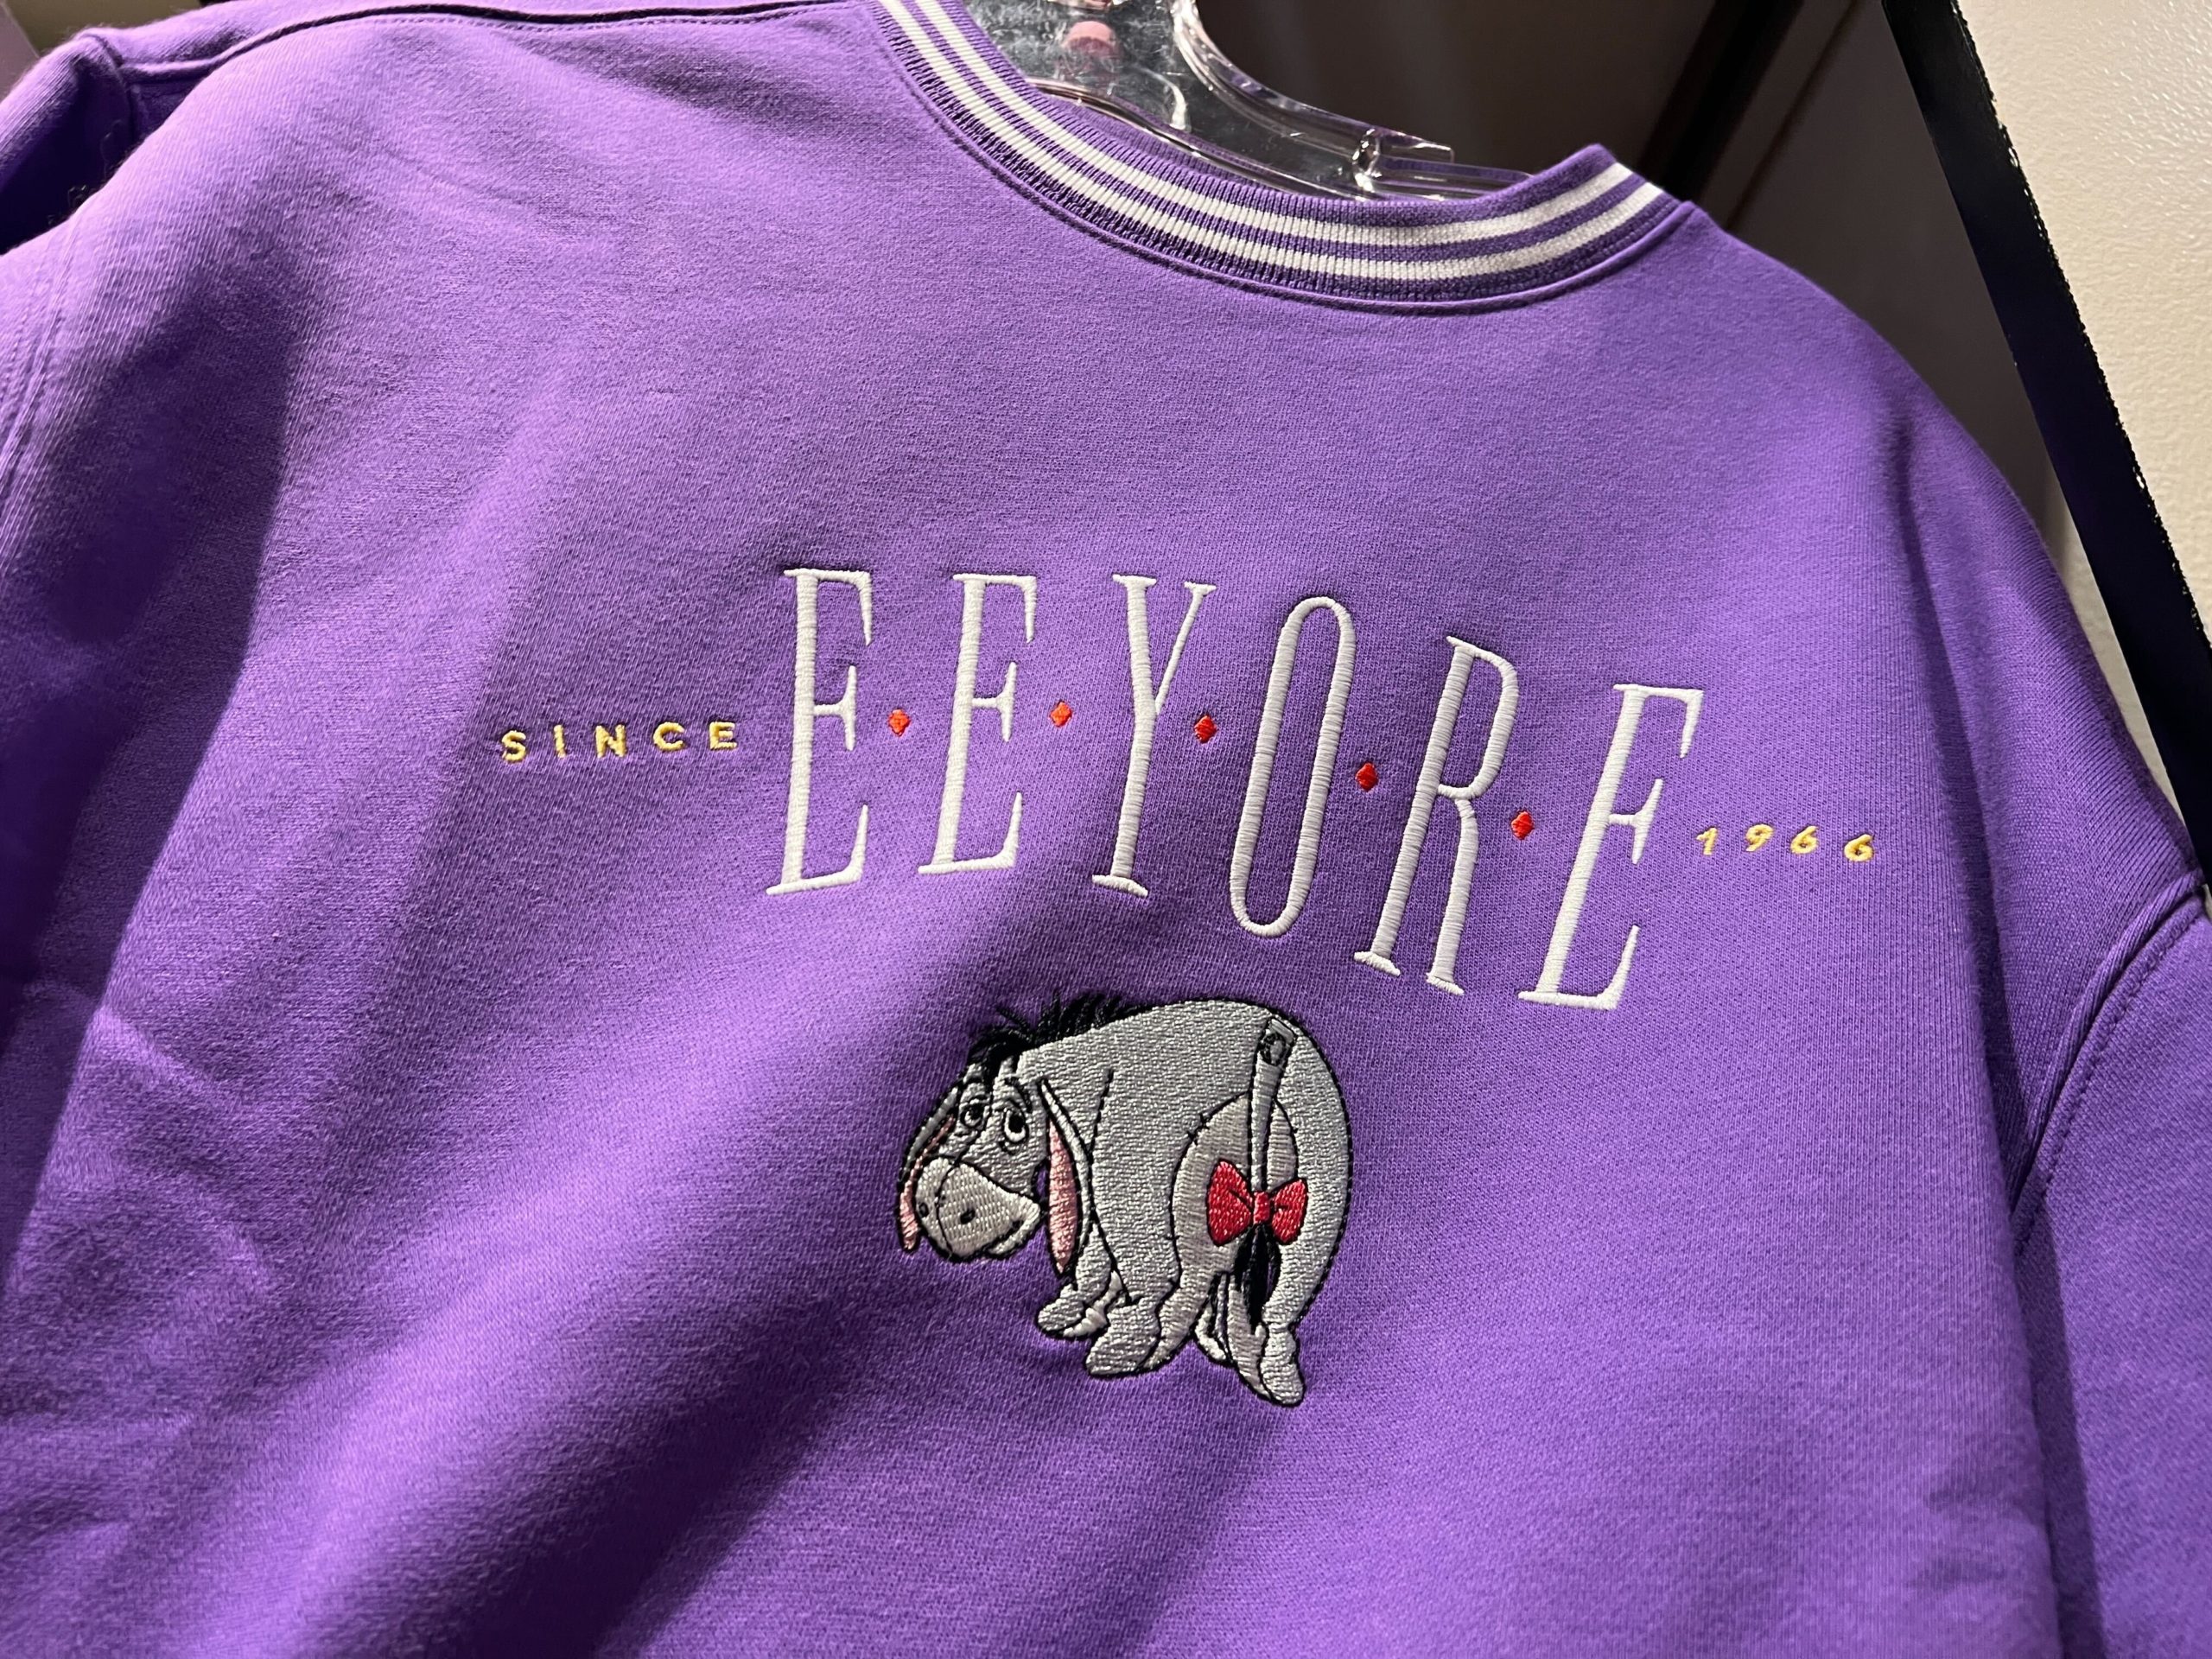 New 1990s-Inspired Winnie the Pooh Sweaters and Crocs Arrive at Disneyland  Resort - WDW News Today